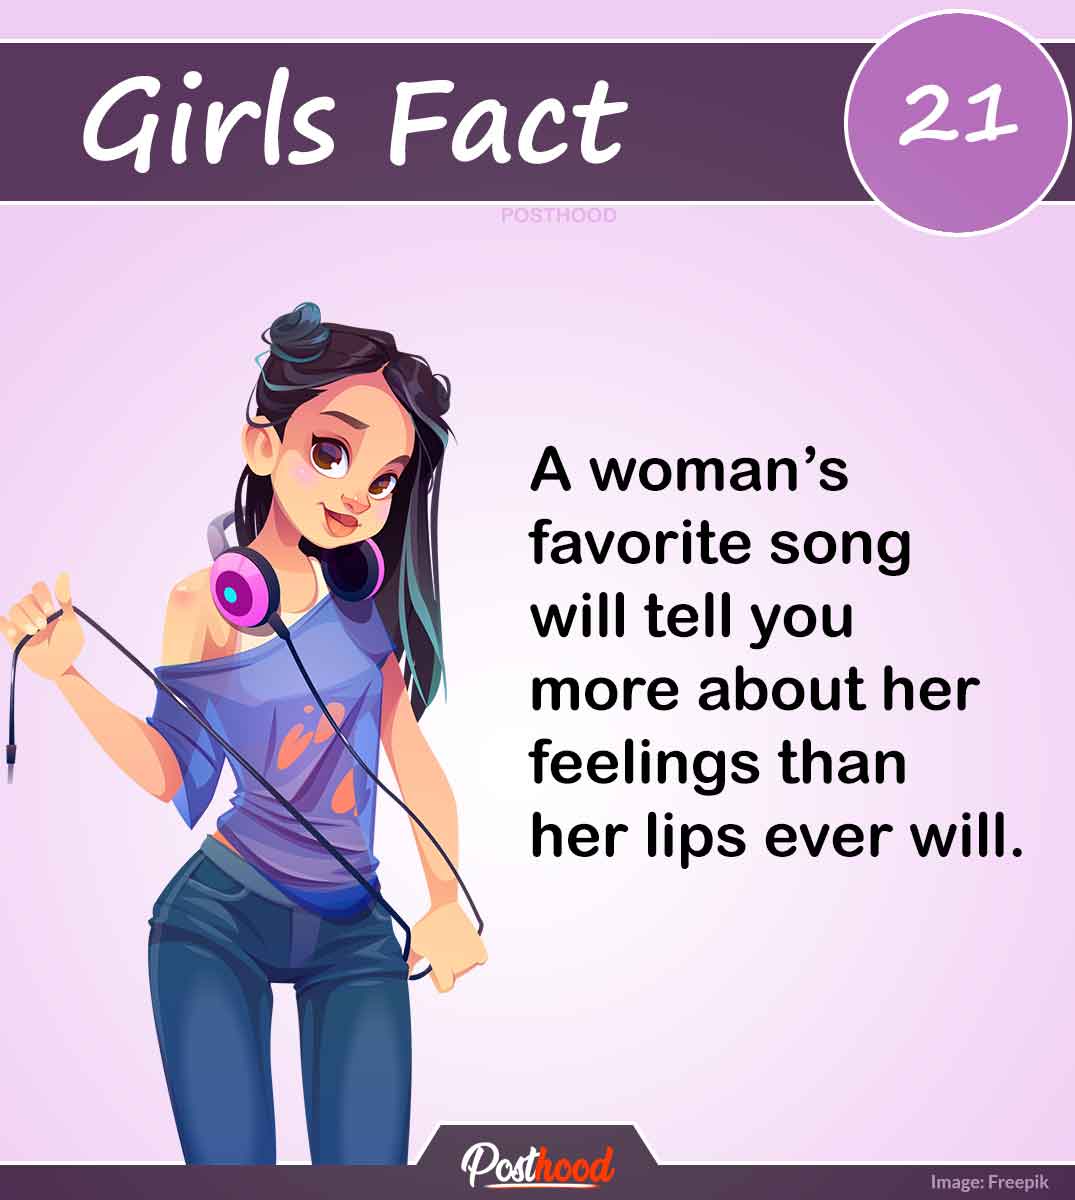 Read her mind with these cool psychological tricks and facts that will help you bring her closer to you. Amazing facts about girls.